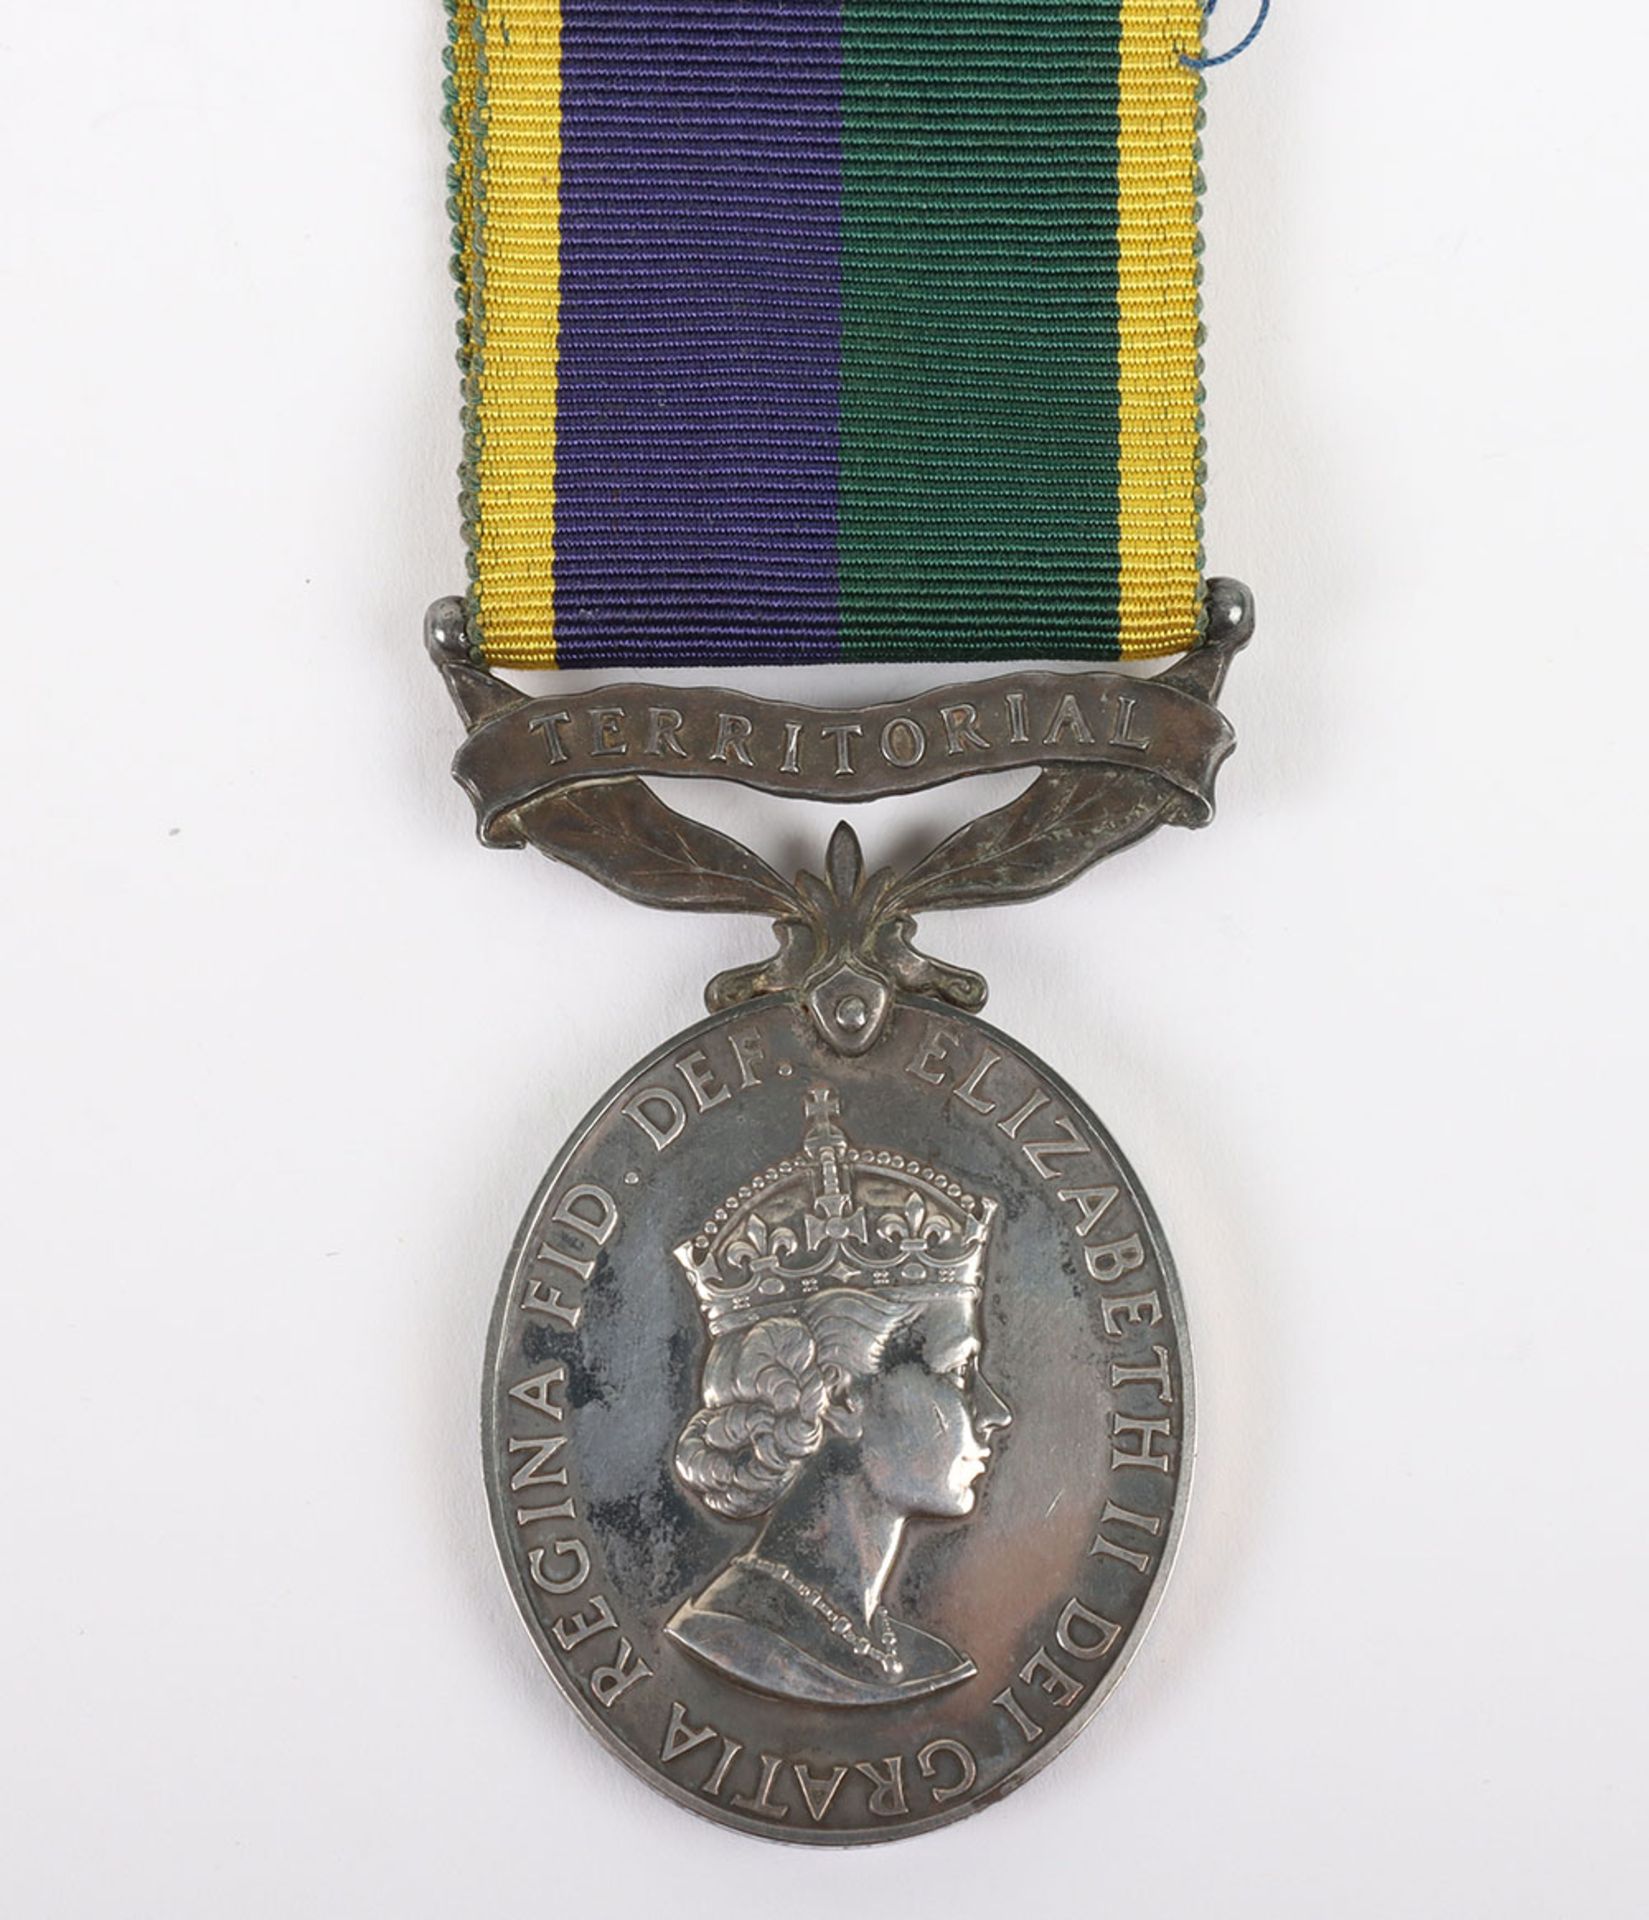 A 1959 Efficiency medal to a Gunner in the Royal Artillery who was awarded a bar to the medal